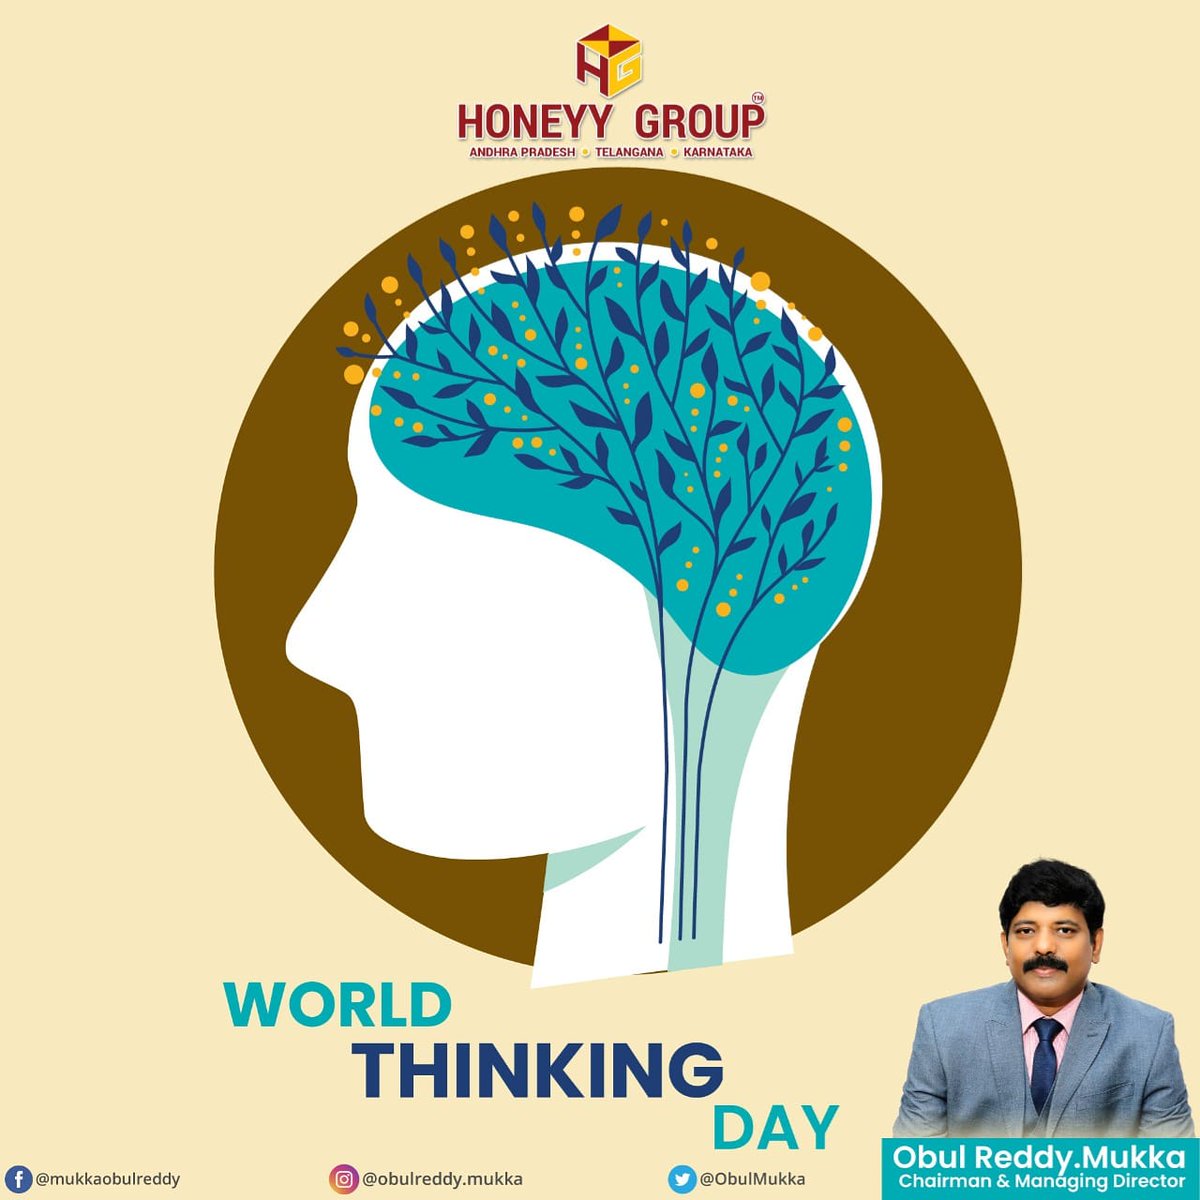 Think out of the box and make this world a better place. An idea can change the life of many who are in need.
#WorldThinkingDay,#WorldThinkingDay2021, #WTD2021, #peace, #Thinkingday, #peacebuilding, #StandTogetherForPeace